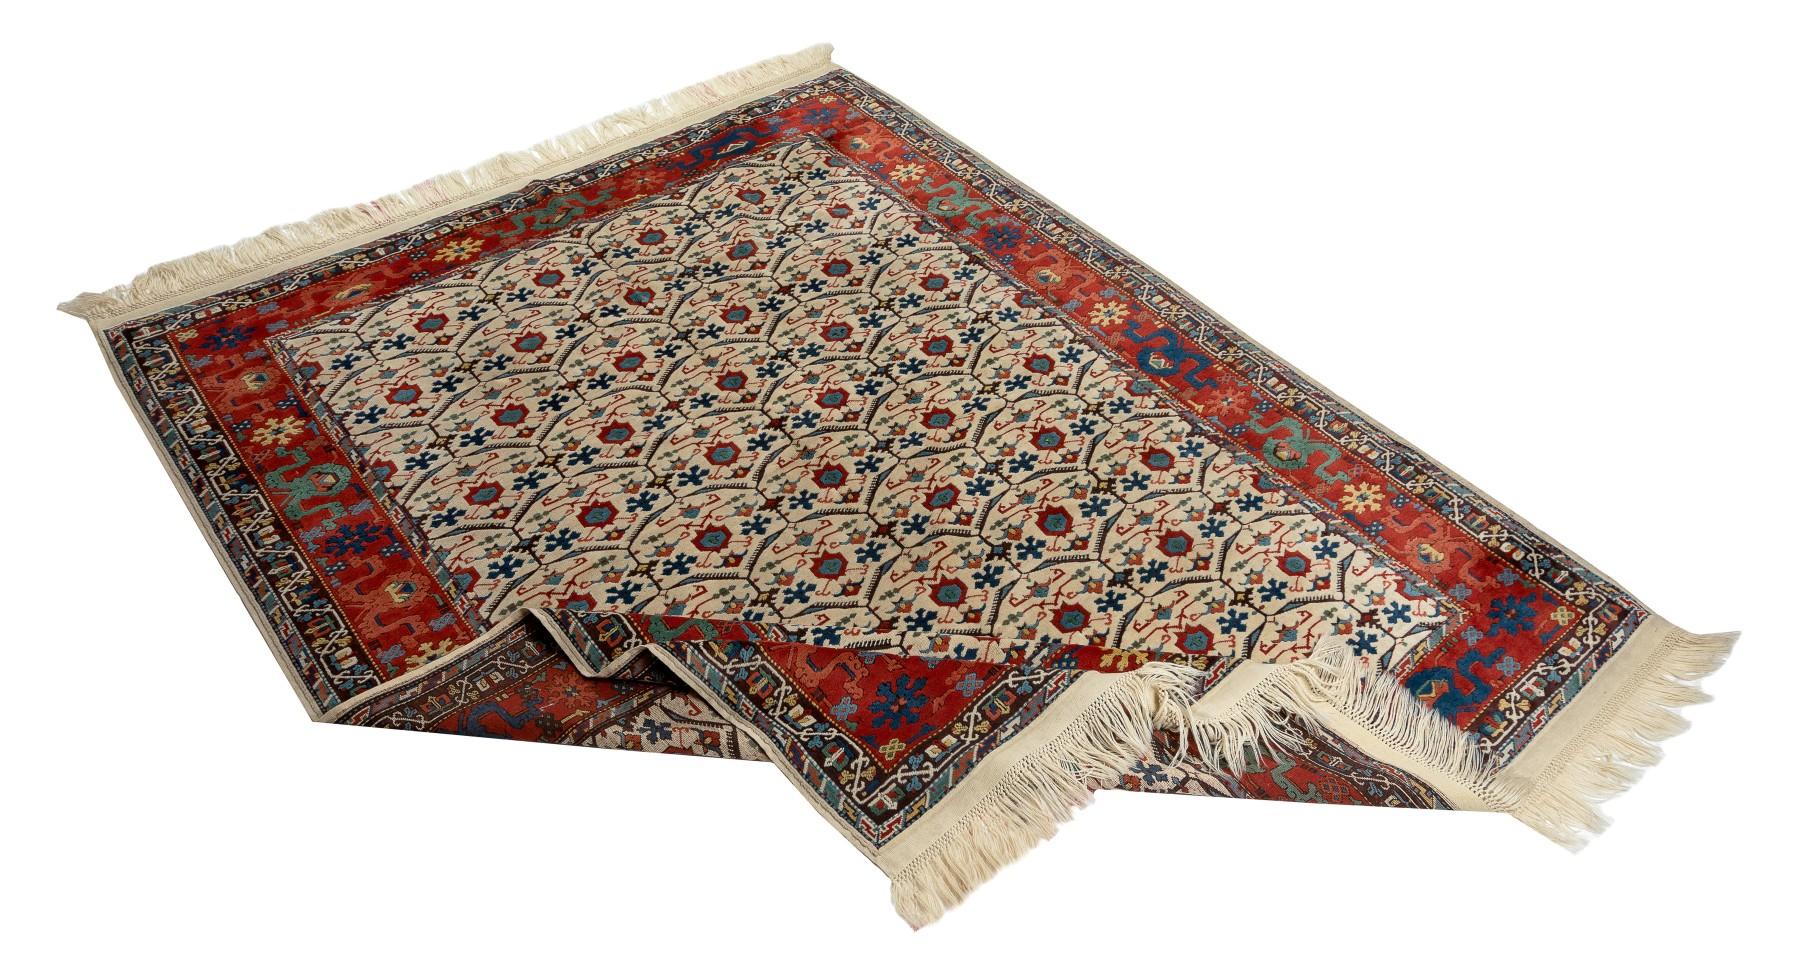 A fine Turkish area rug and 100% natural dyed wool.
Finely hand-knotted with even medium wool pile on wool foundation. Sturdy and can be used in a high traffic area, suitable for both residential and commercial interiors. Measures: 7 x 9 Ft.